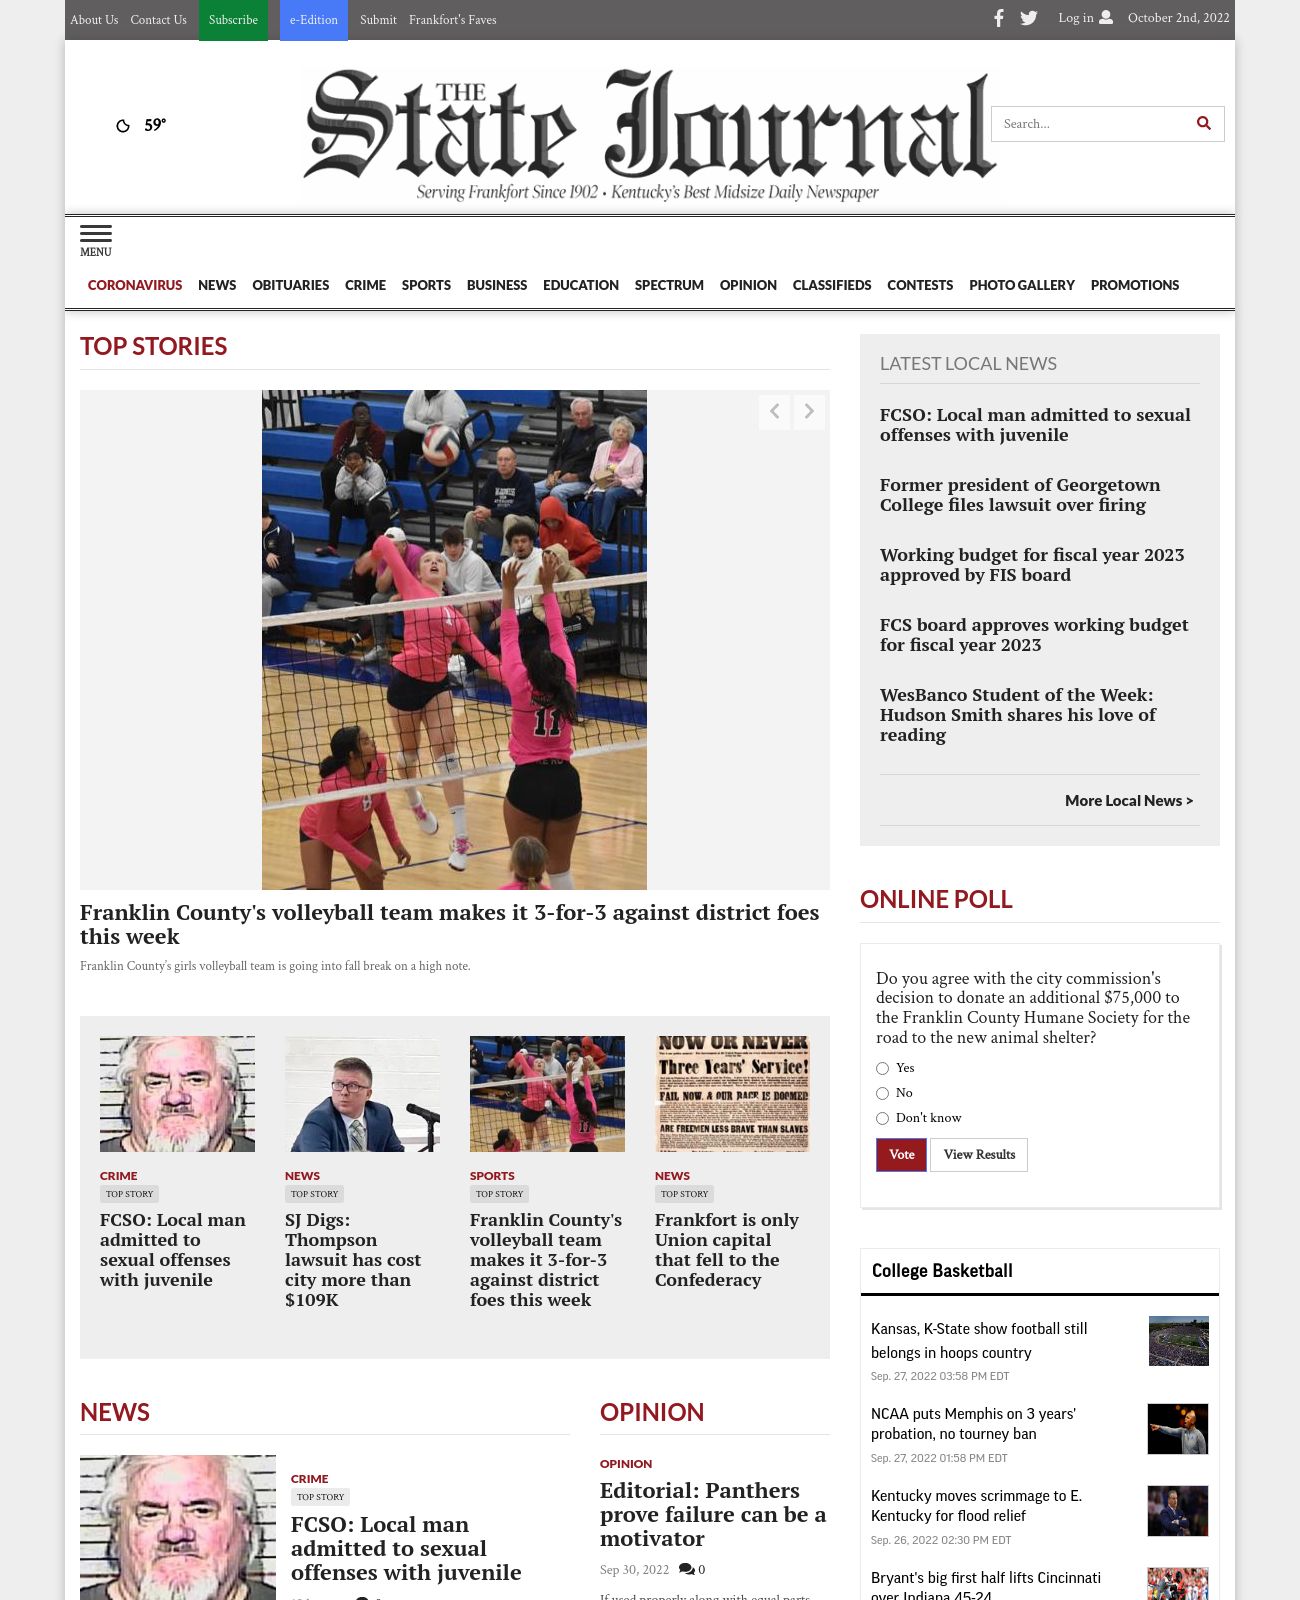 Frankfort State Journal at 2022-10-02 03:13:55-04:00 local time